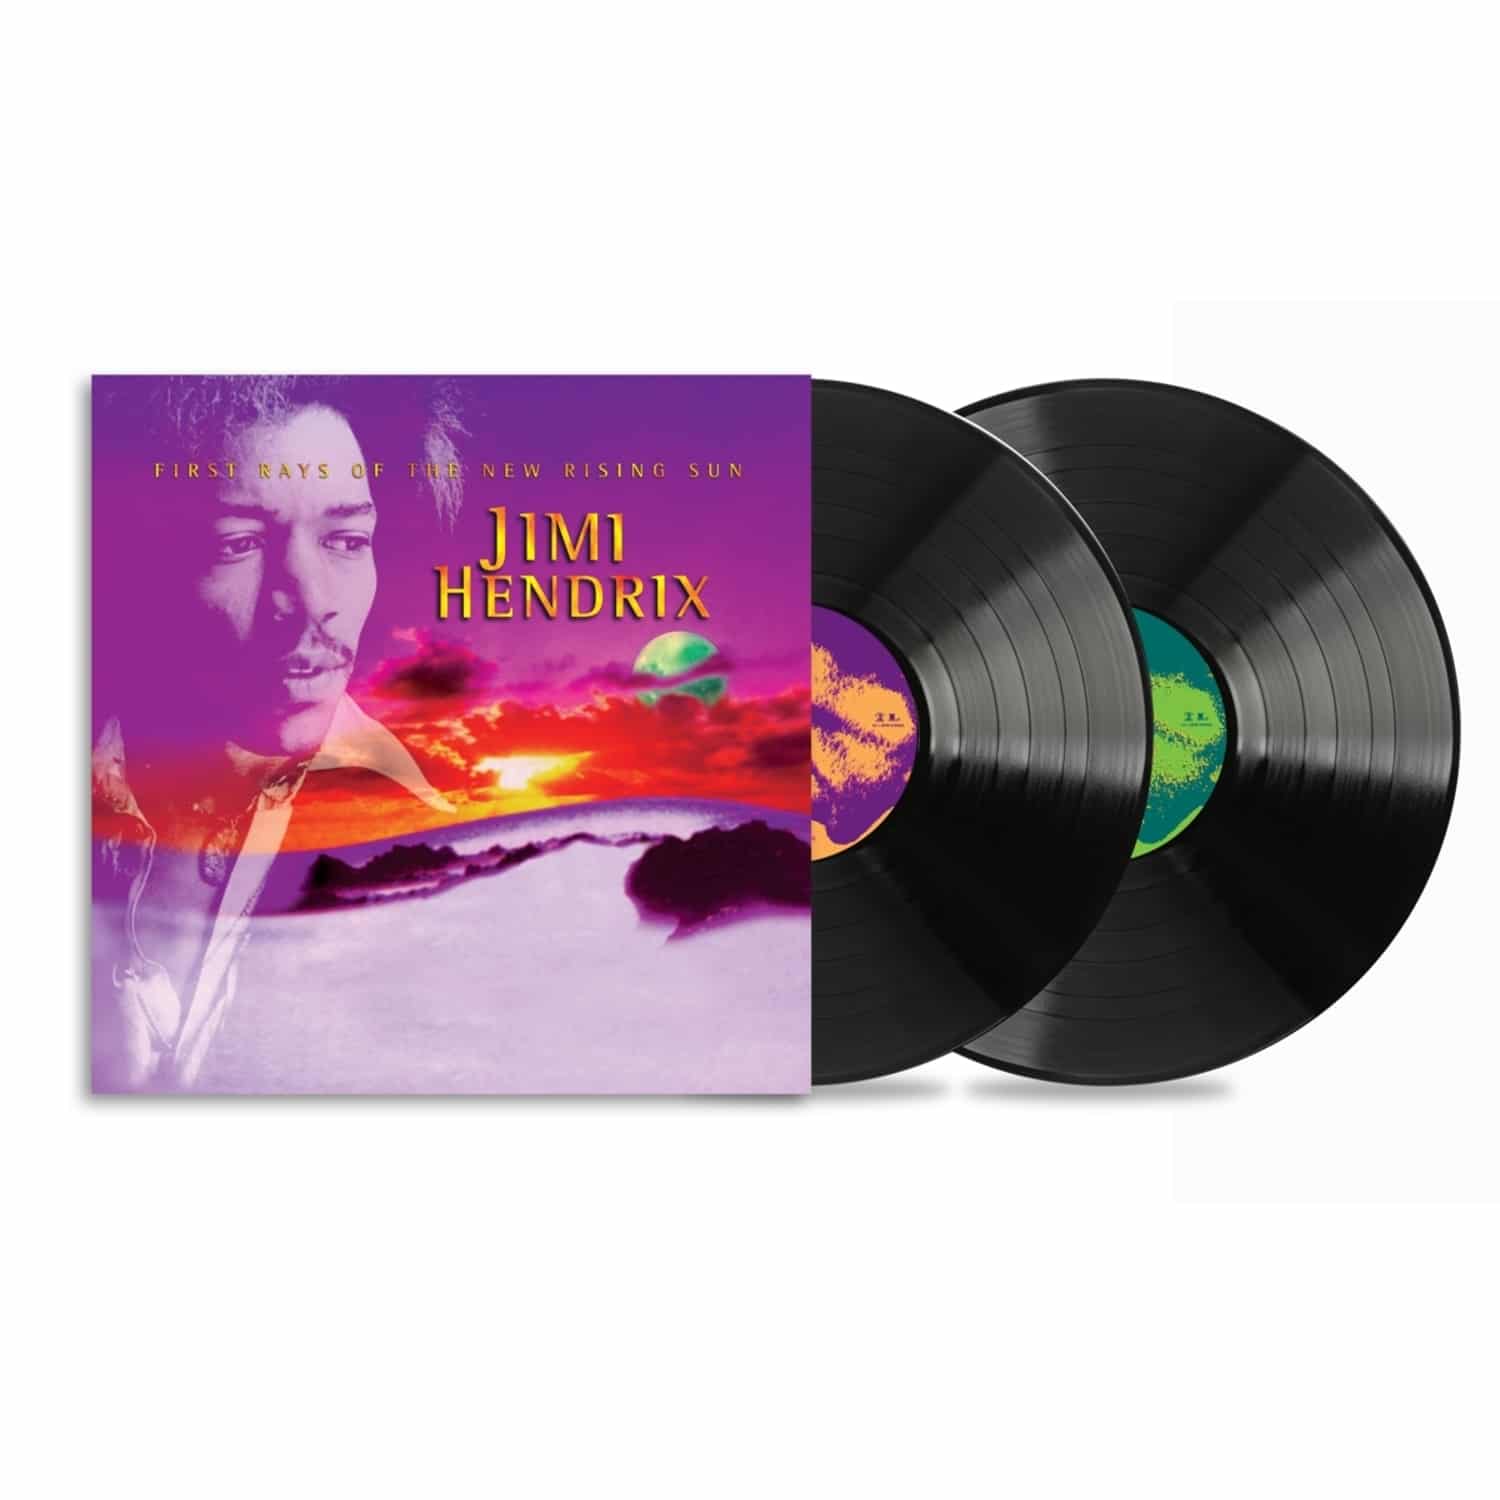 Jimi Hendrix - FIRST RAYS OF THE NEW RISING SUN 